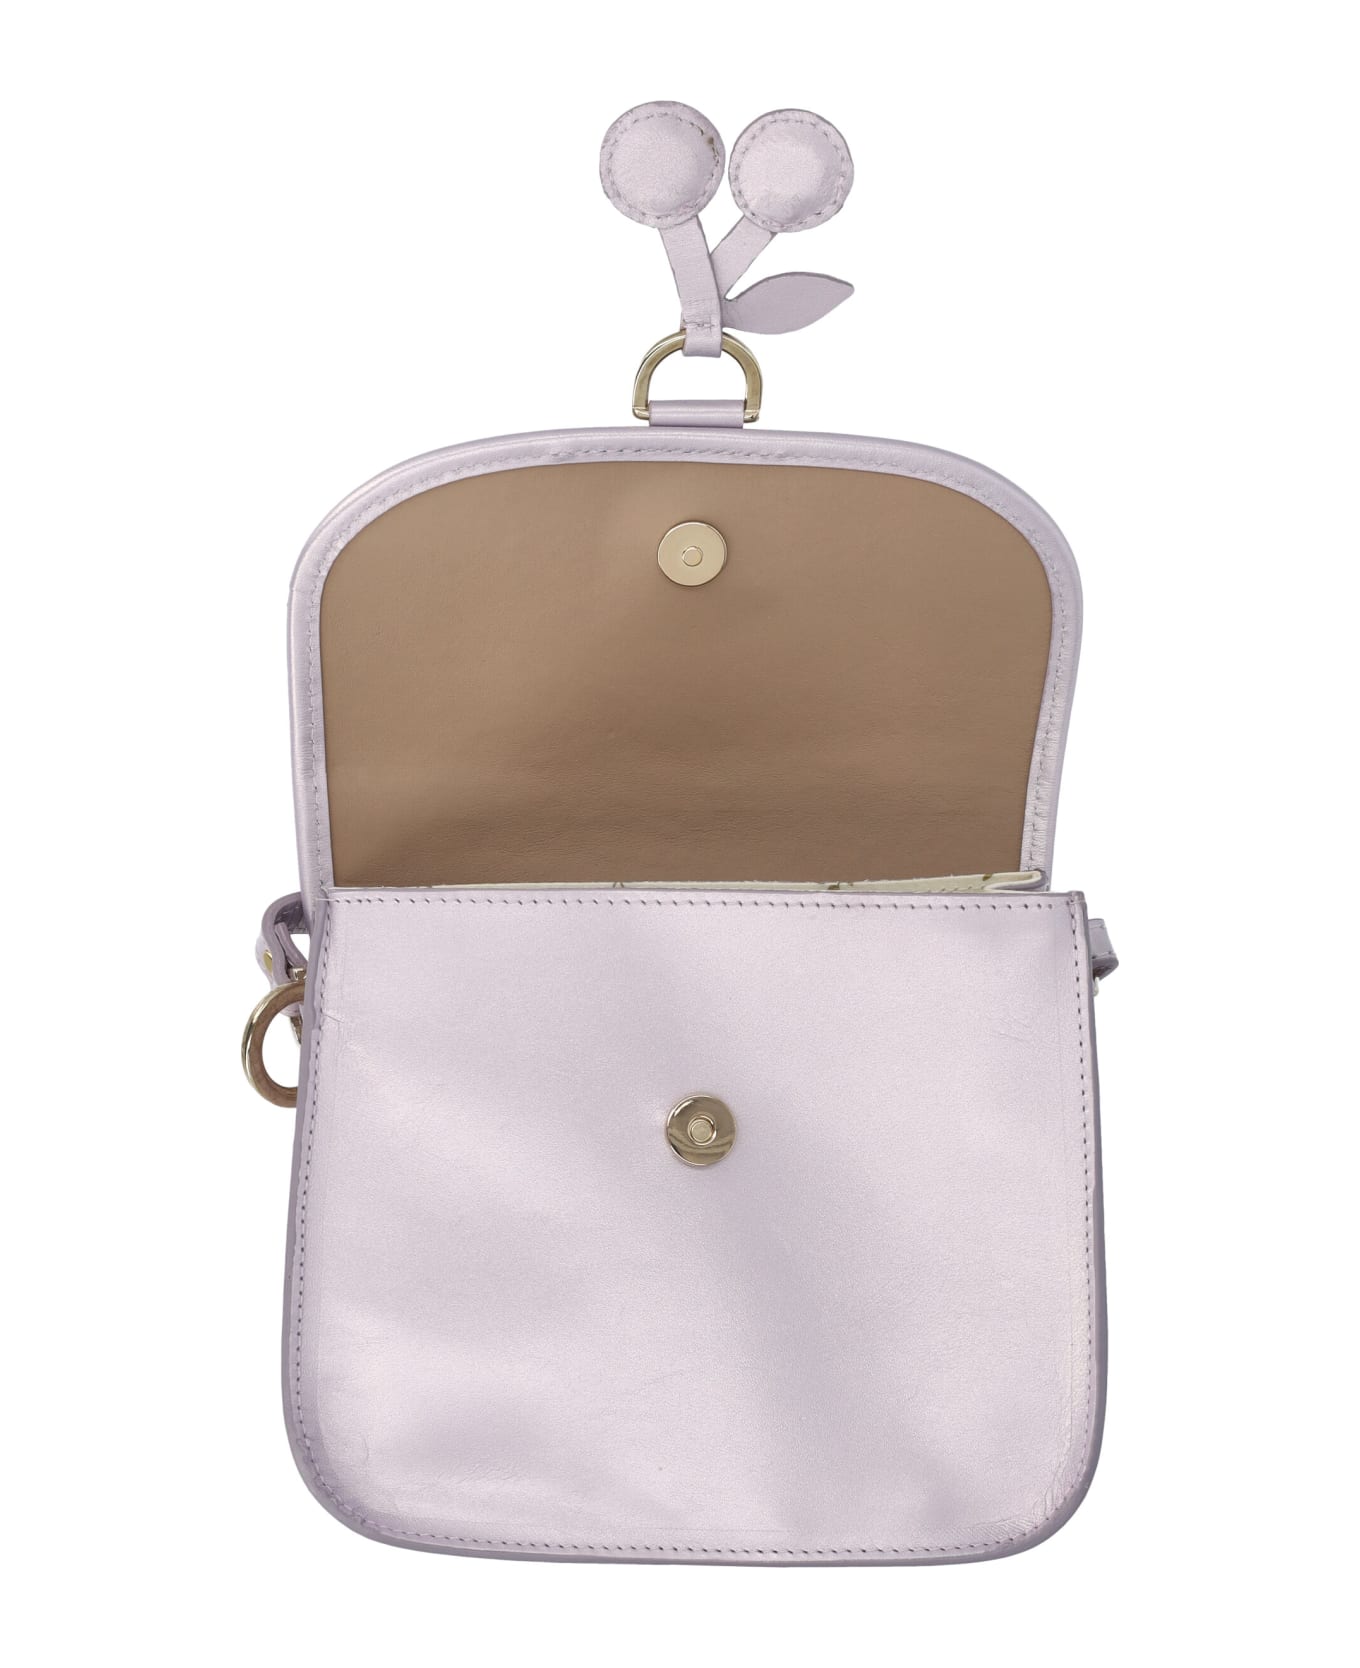 Bonpoint Cherry Crossbody Bag - PARME FONCE アクセサリー＆ギフト